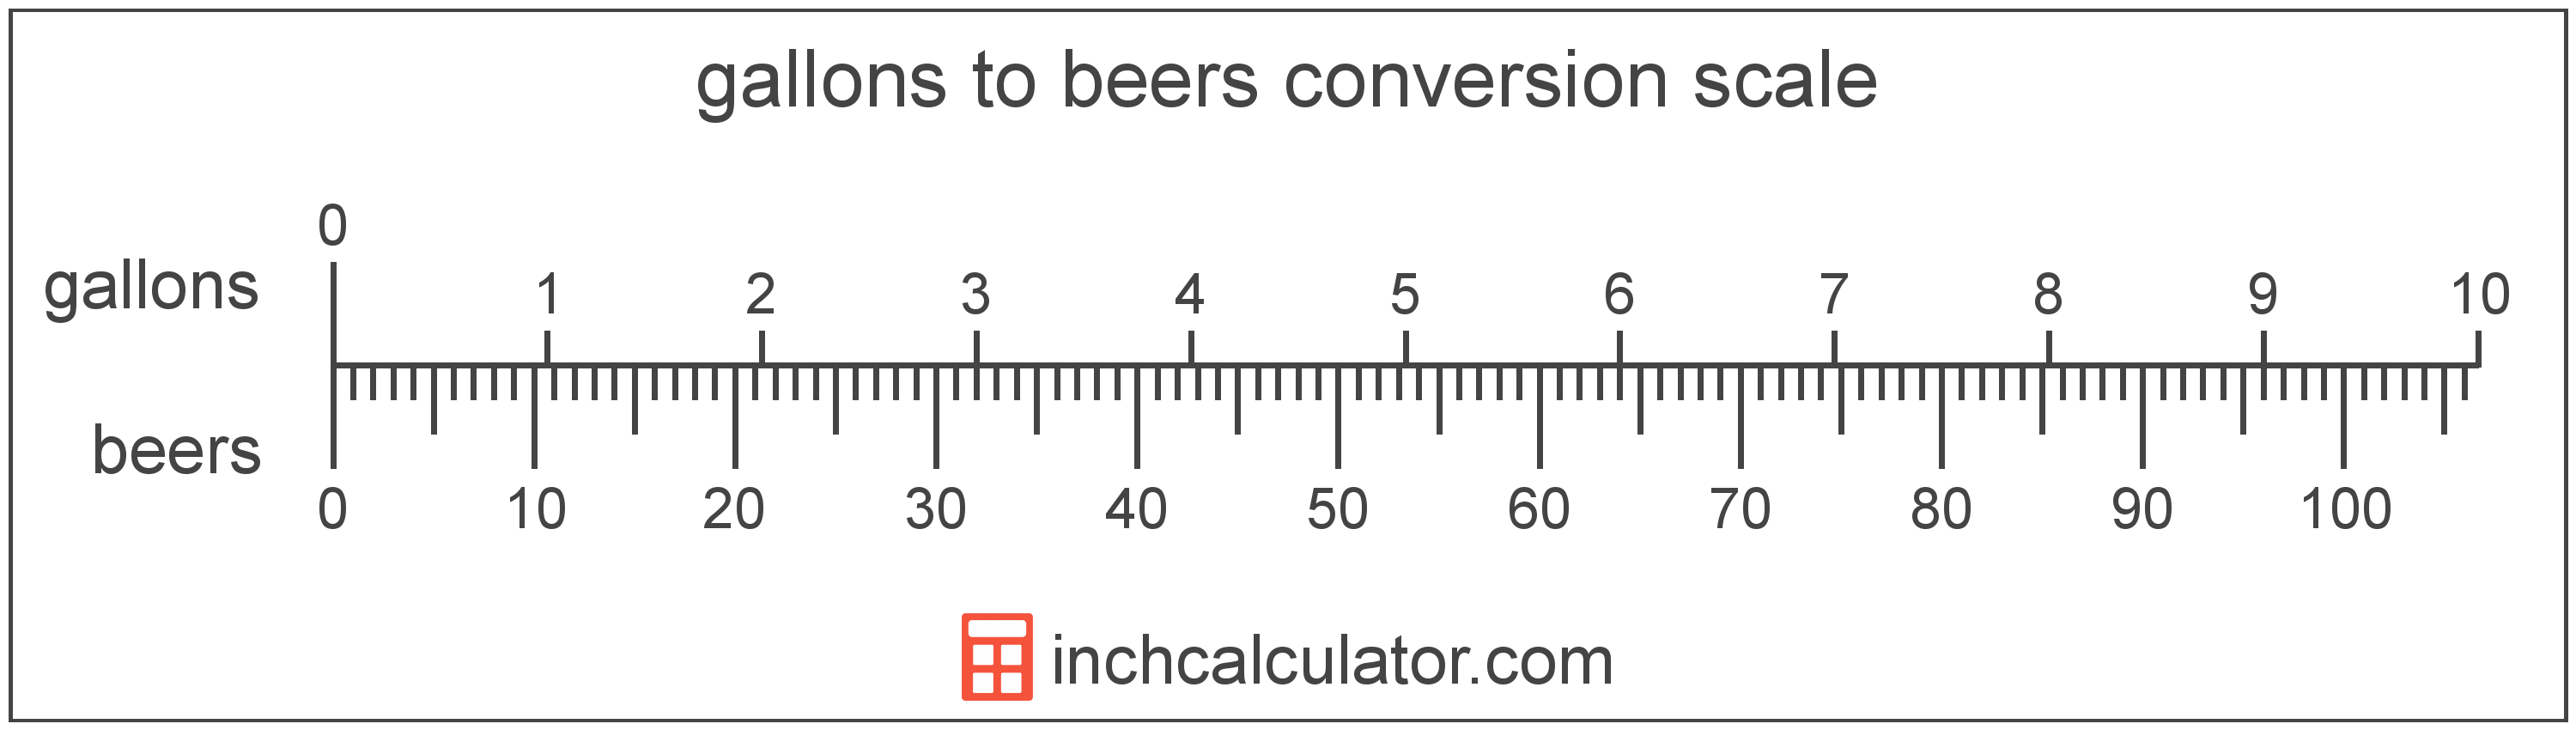 conversion scale showing gallons and equivalent beers beer volume values